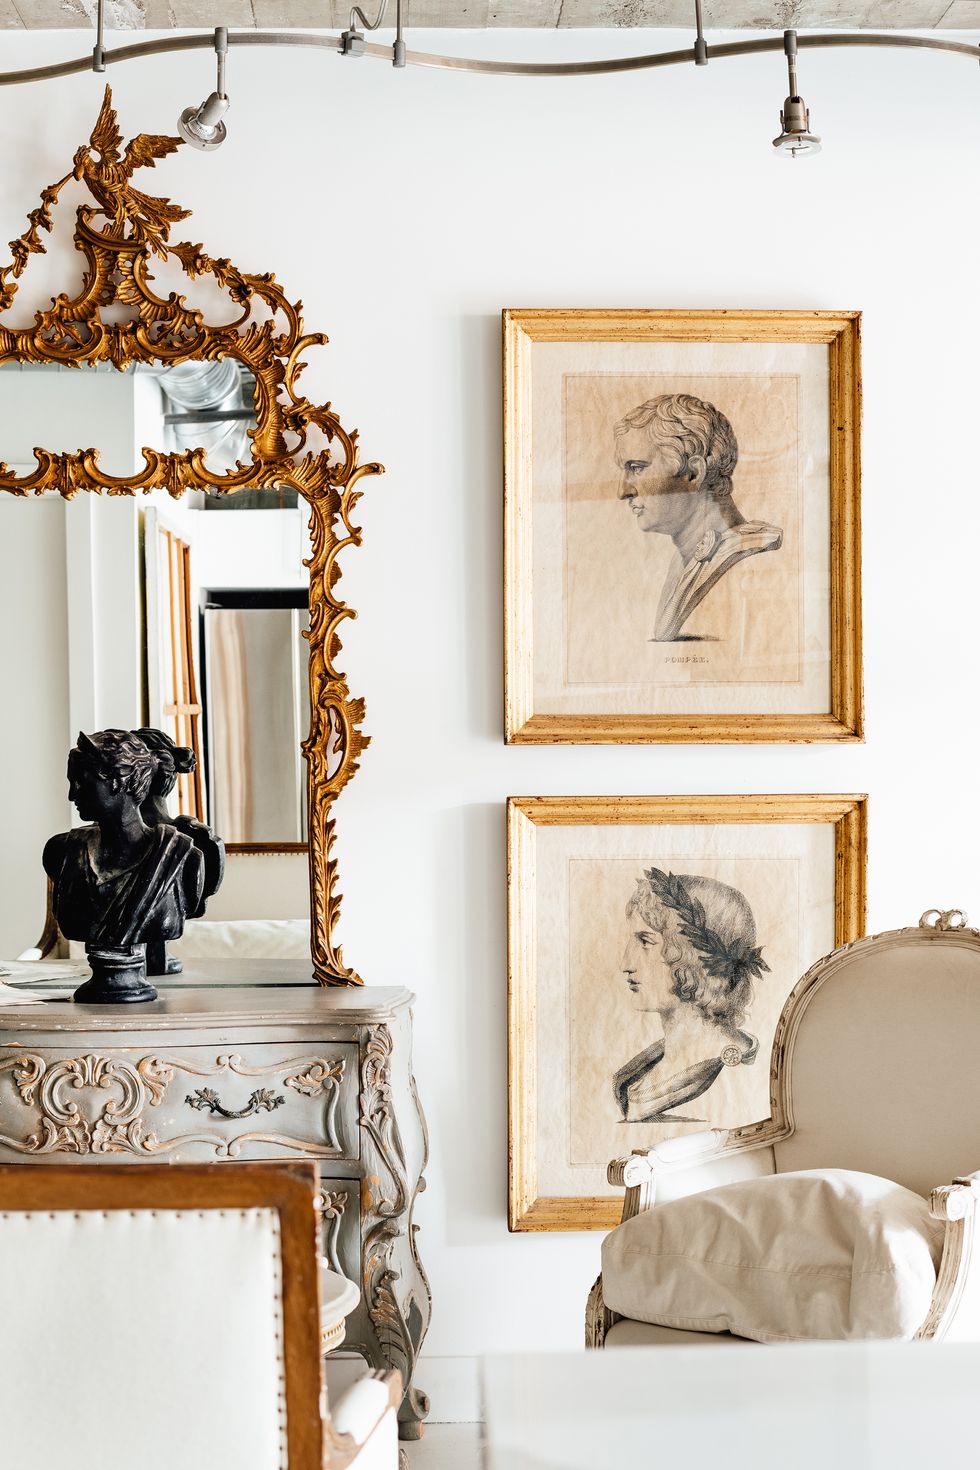 section of a mantle with a mirror on top and a figurine in front of it, surrounded by framed images of pencil sketches